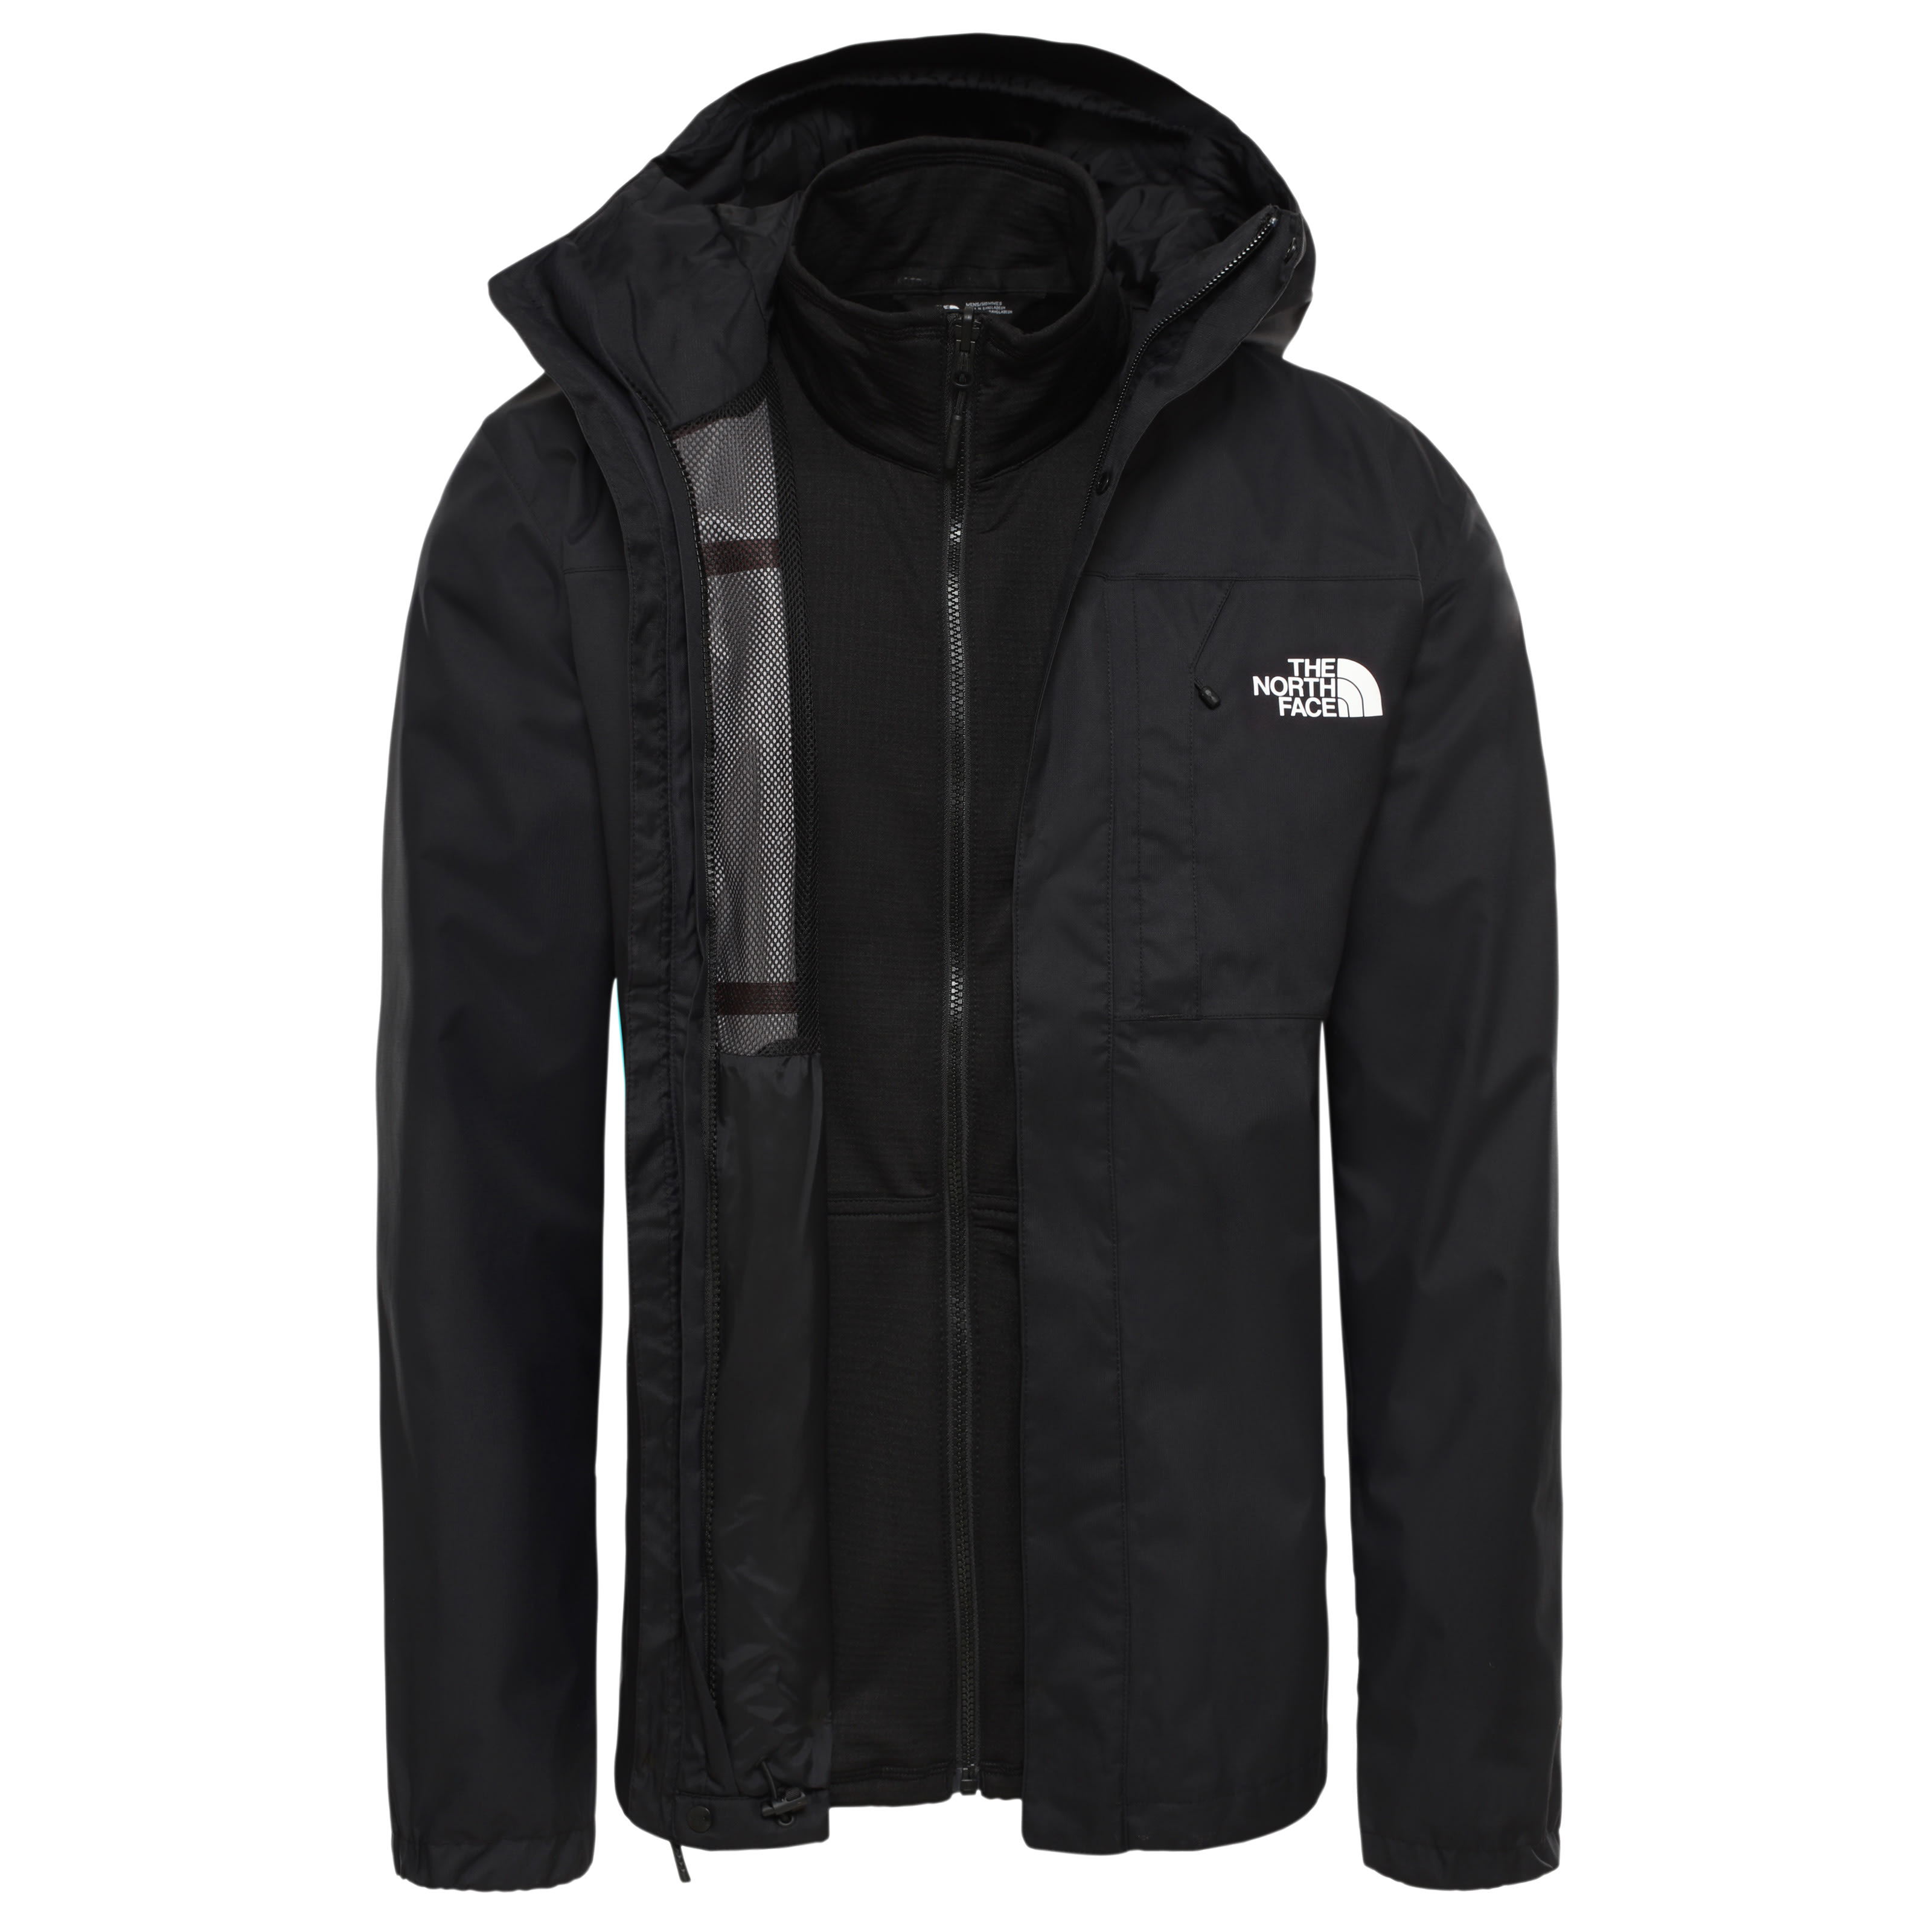 Køb The North Face Men's Quest Triclimate Jacket fra Outnorth